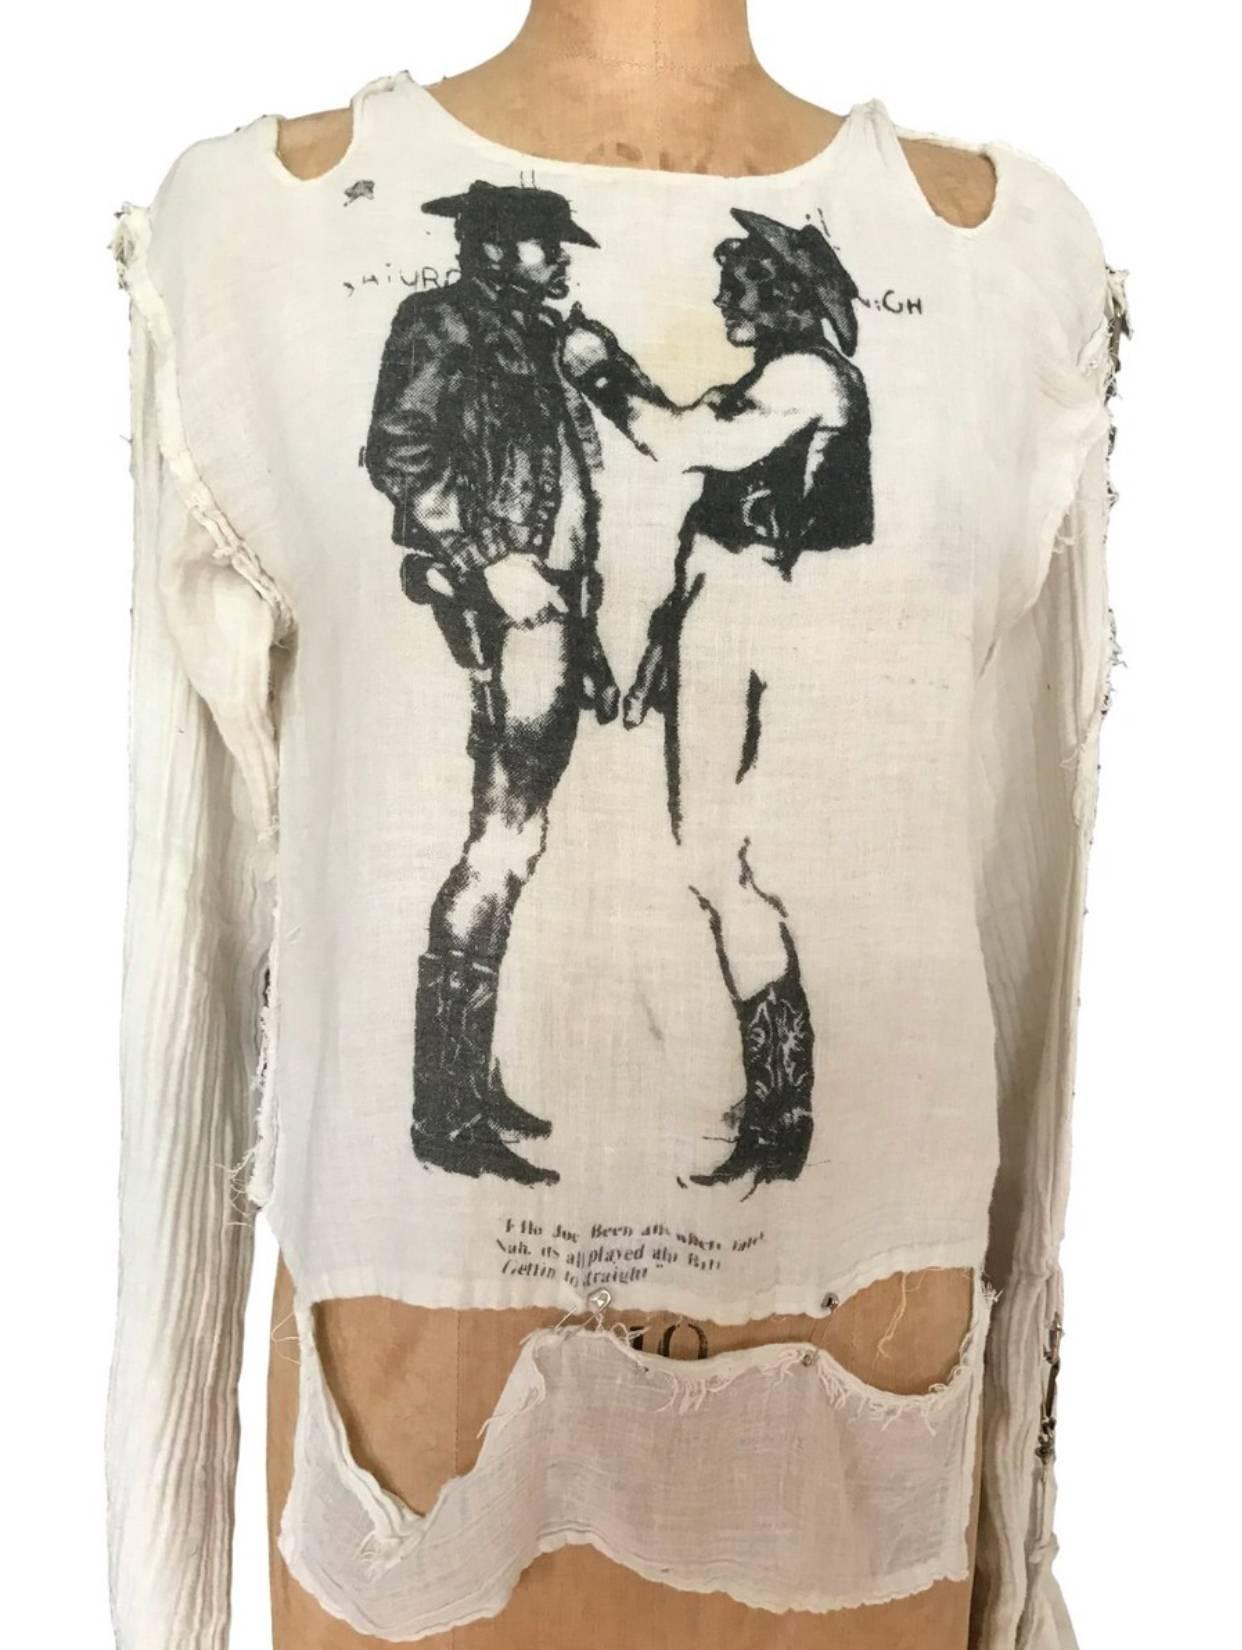 Westwood/ Mclaren Seditionaries "Gay Cowboys" Muslin Shirt / Top Original label but text has faded. 

Up to a 38 chest 

Safety pins holding bottom section onto main body of shirt. In excellent condition compared to many found available